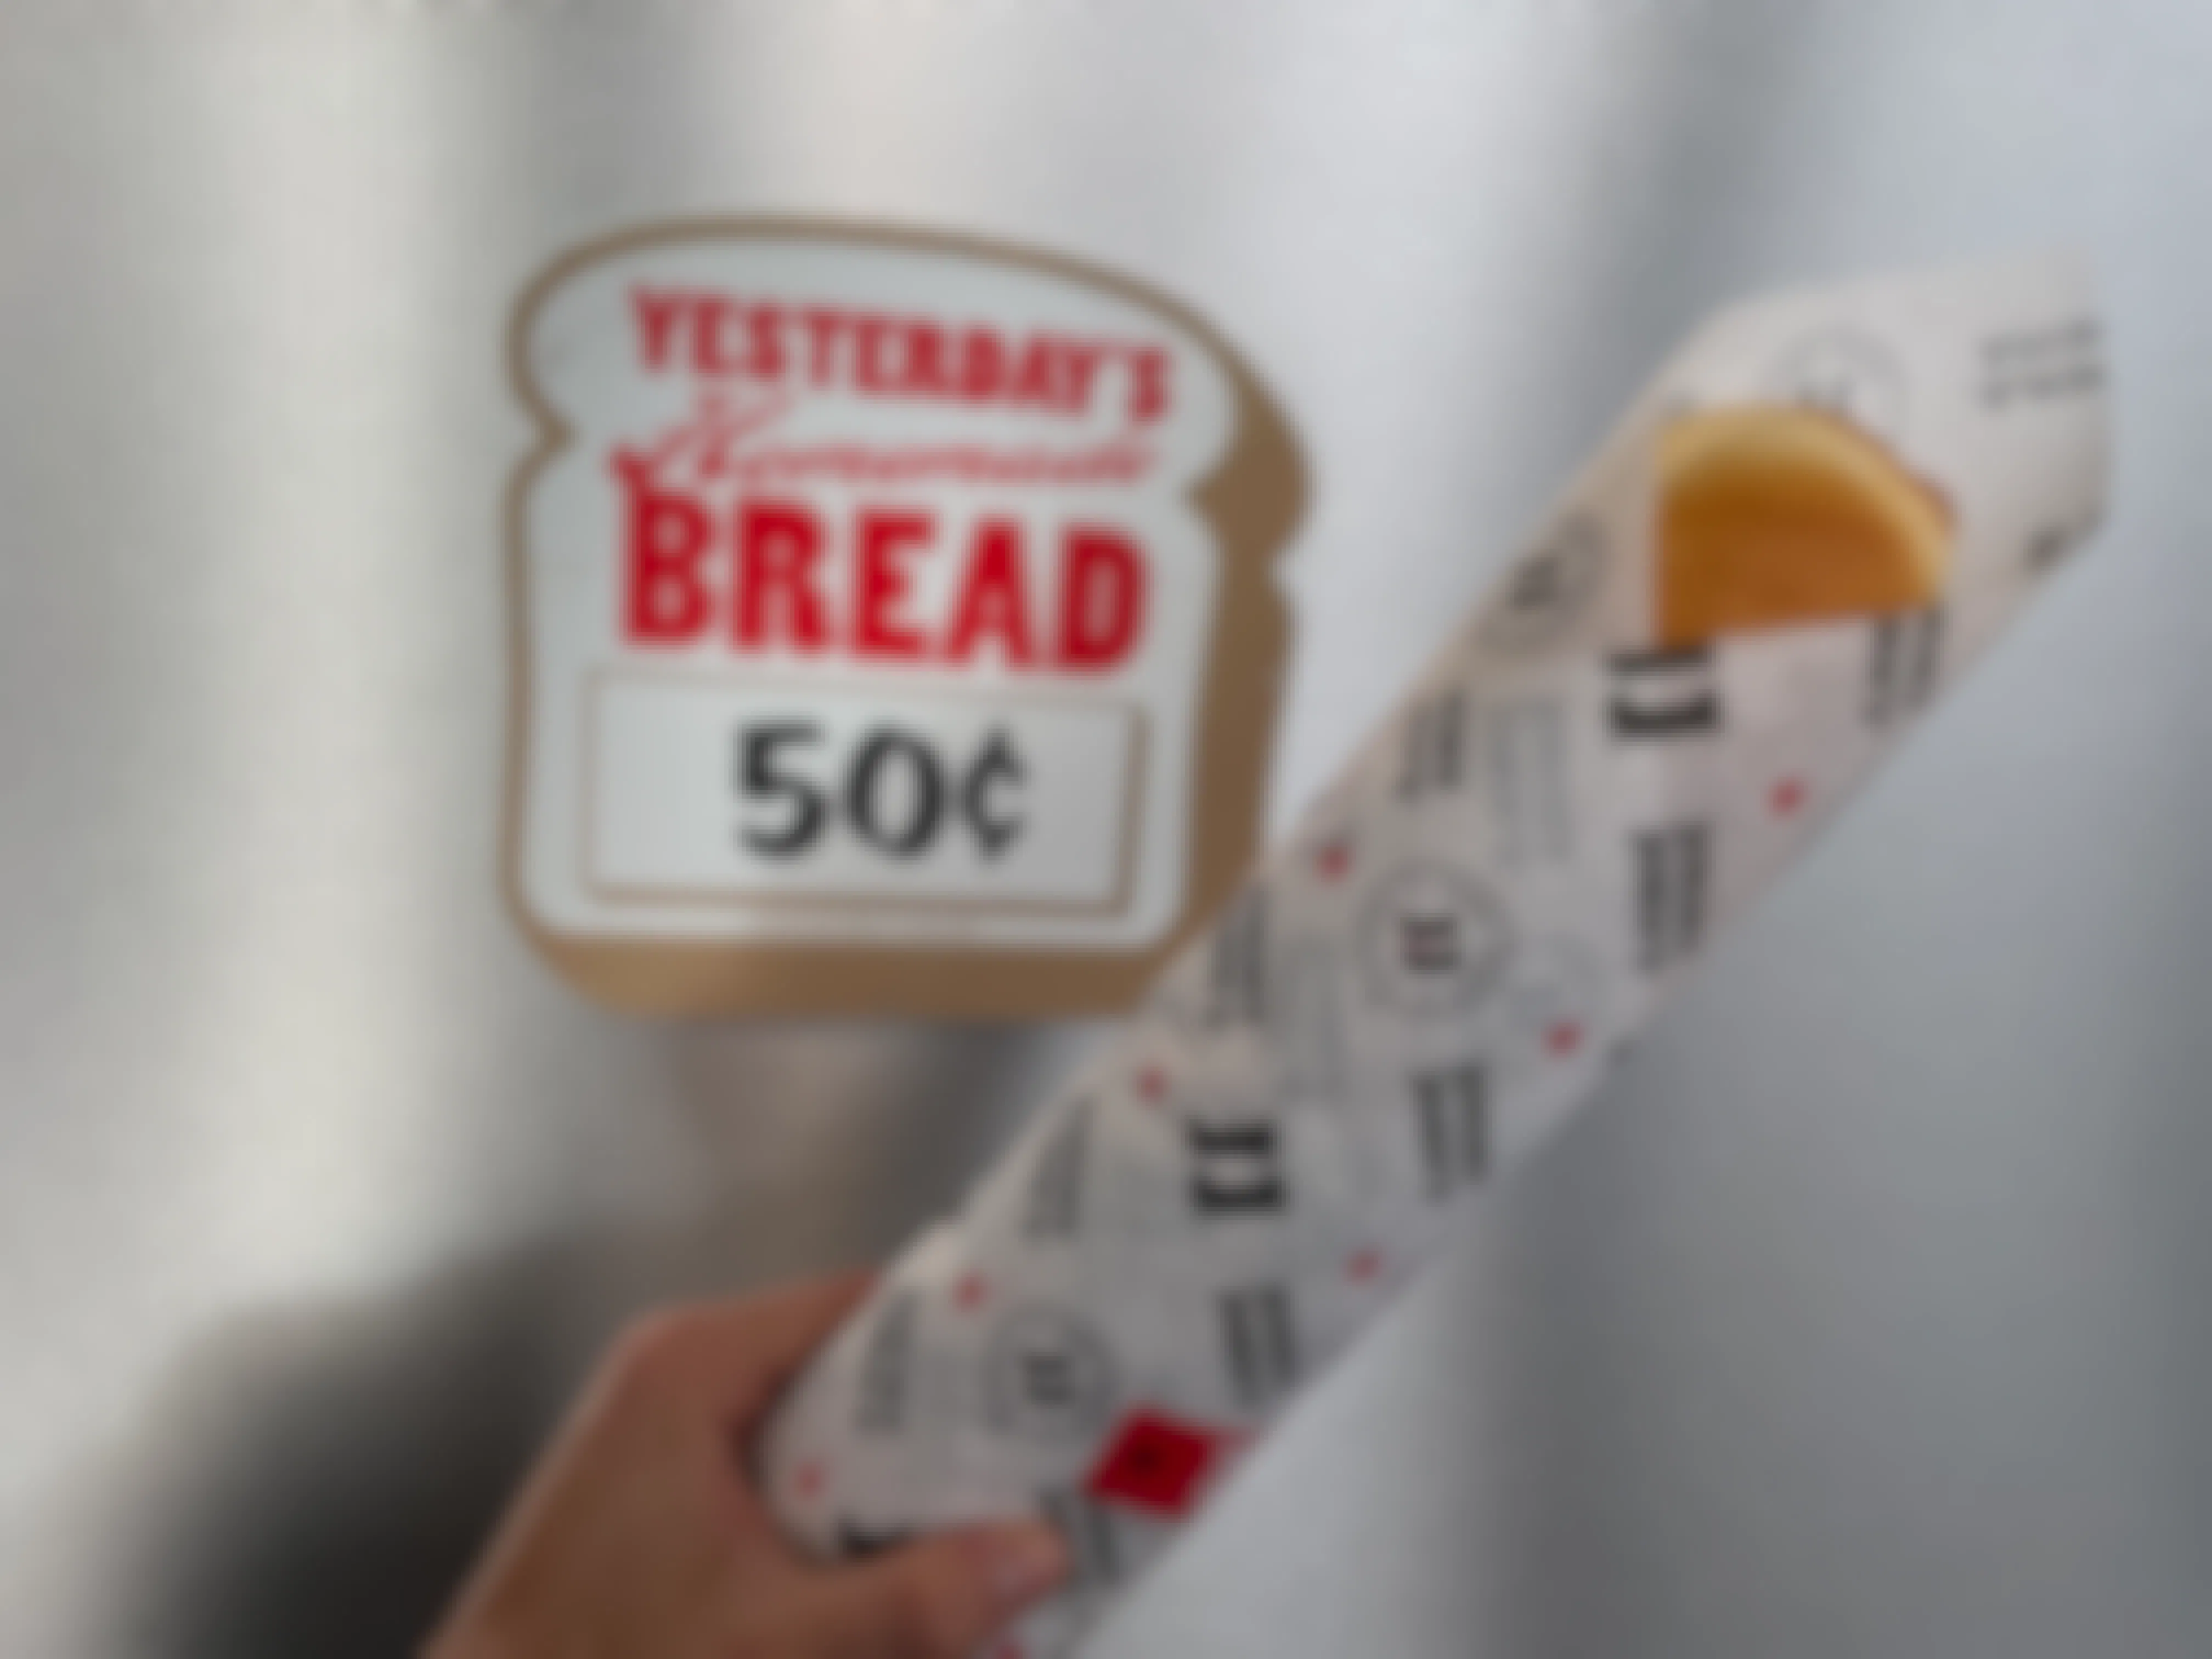 50 cent day-old bread at Jimmy John's